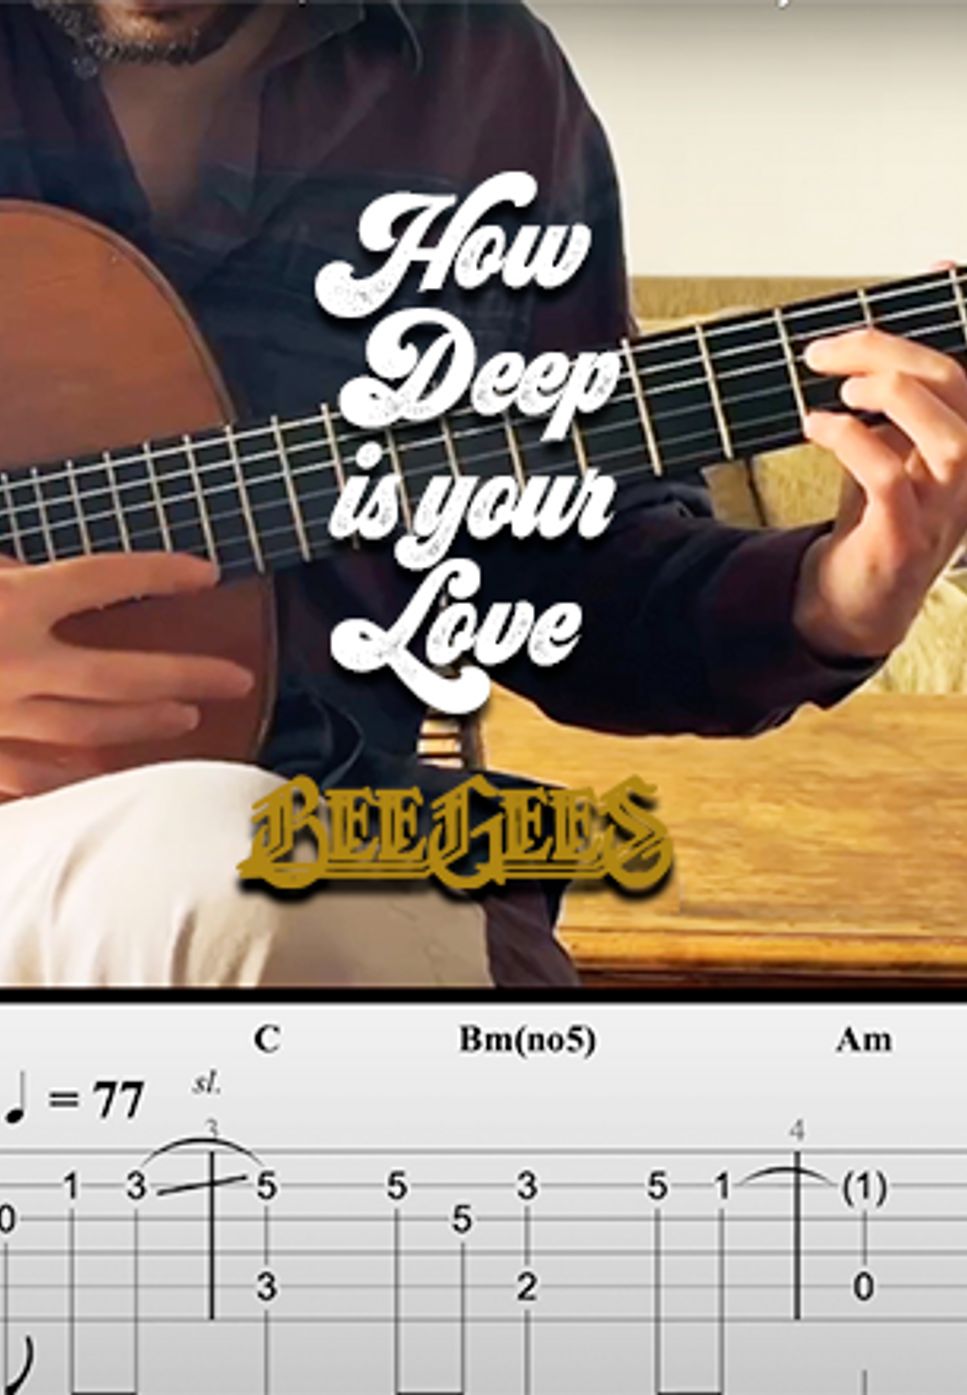 Bee gees - How Deep is your Love (Classical fingerstyle guitar) by Nomad's Guitar Journey